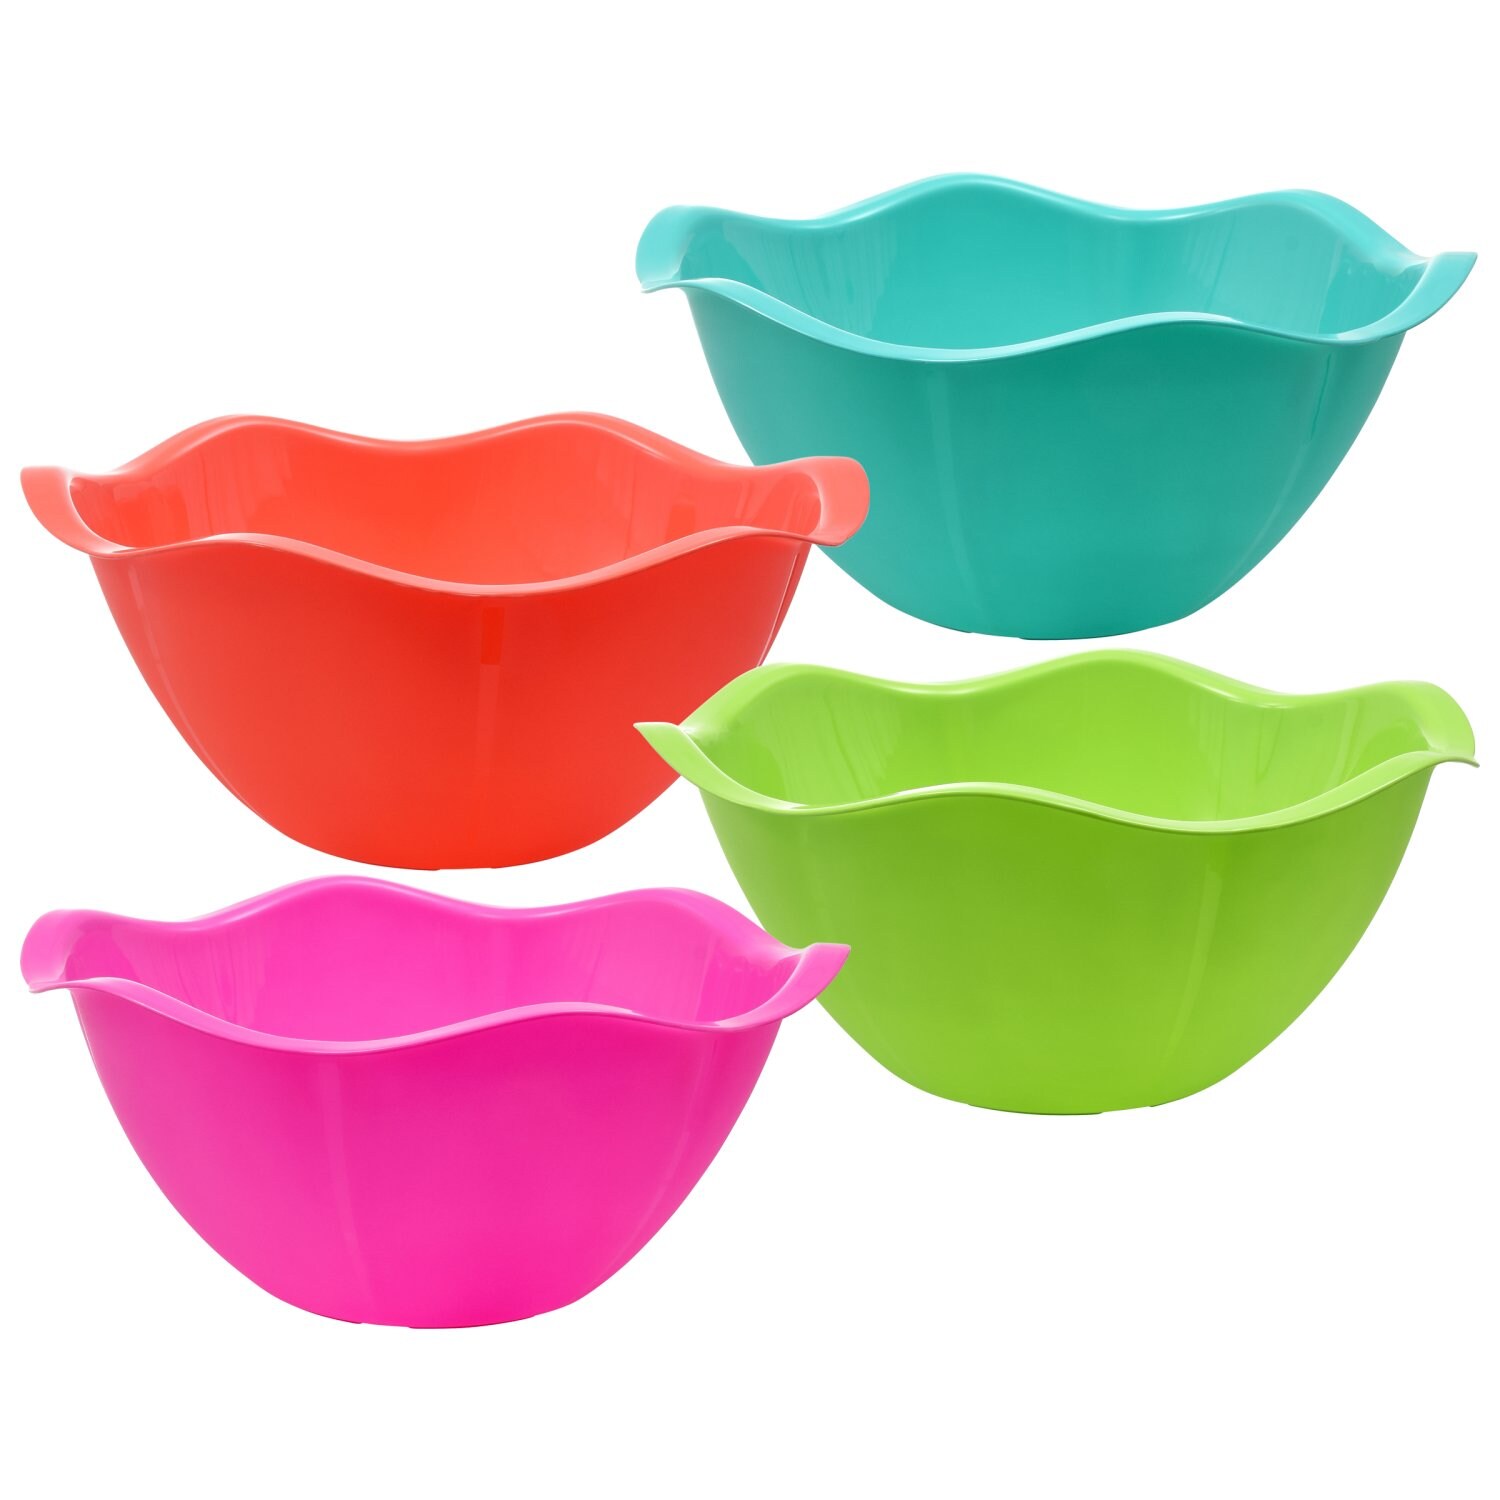 Chips Disposable Serving Bowls Saled Great for Snack Summer Colors Candy Dish 4 Pack Plastic Bowl